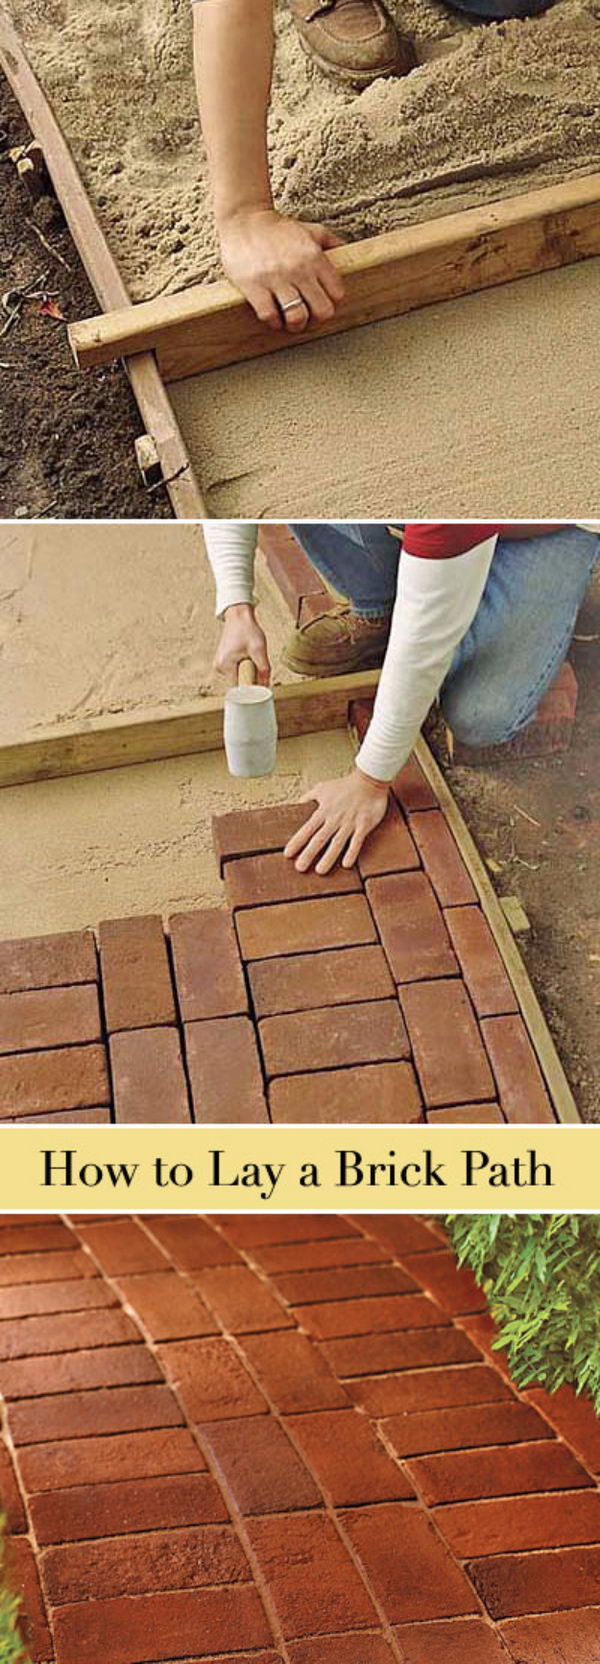 How to Lay a Brick Path. 